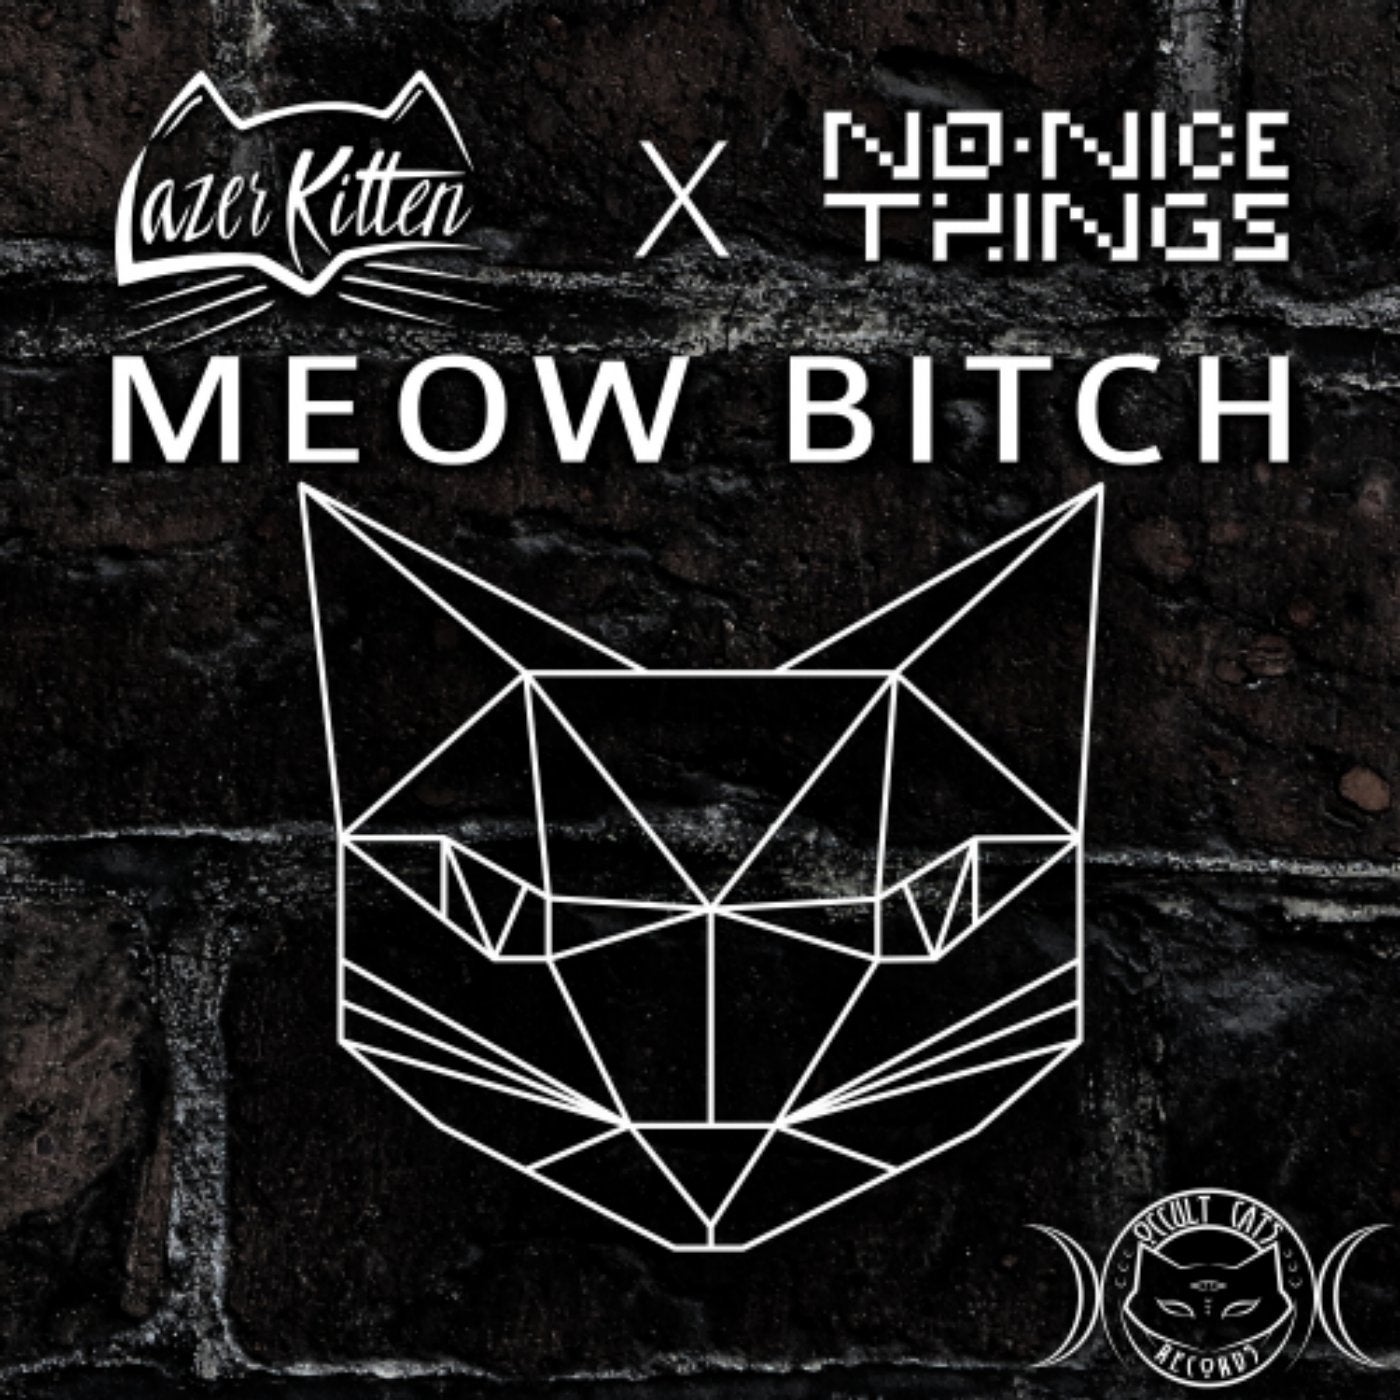 Meow Bitch (feat. No Nice Things)